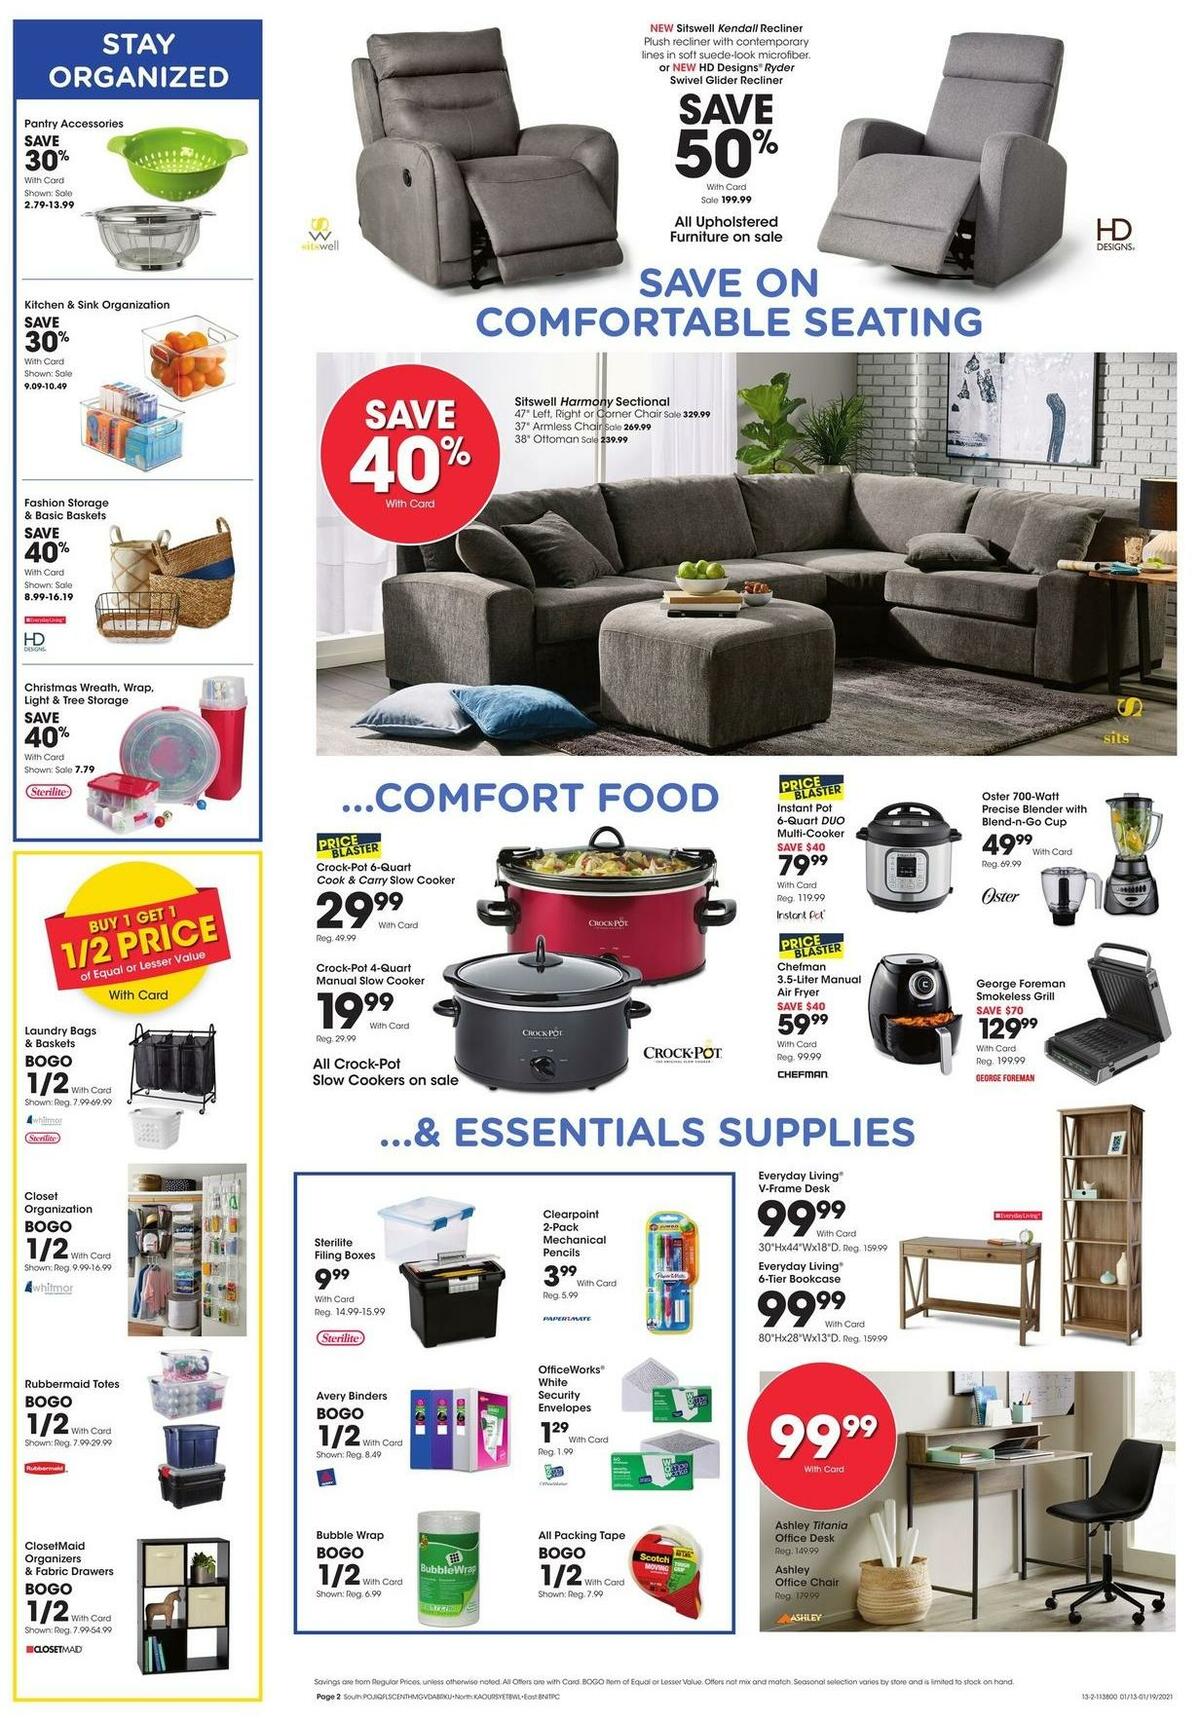 Fred Meyer General Merchandise Weekly Ad from January 13